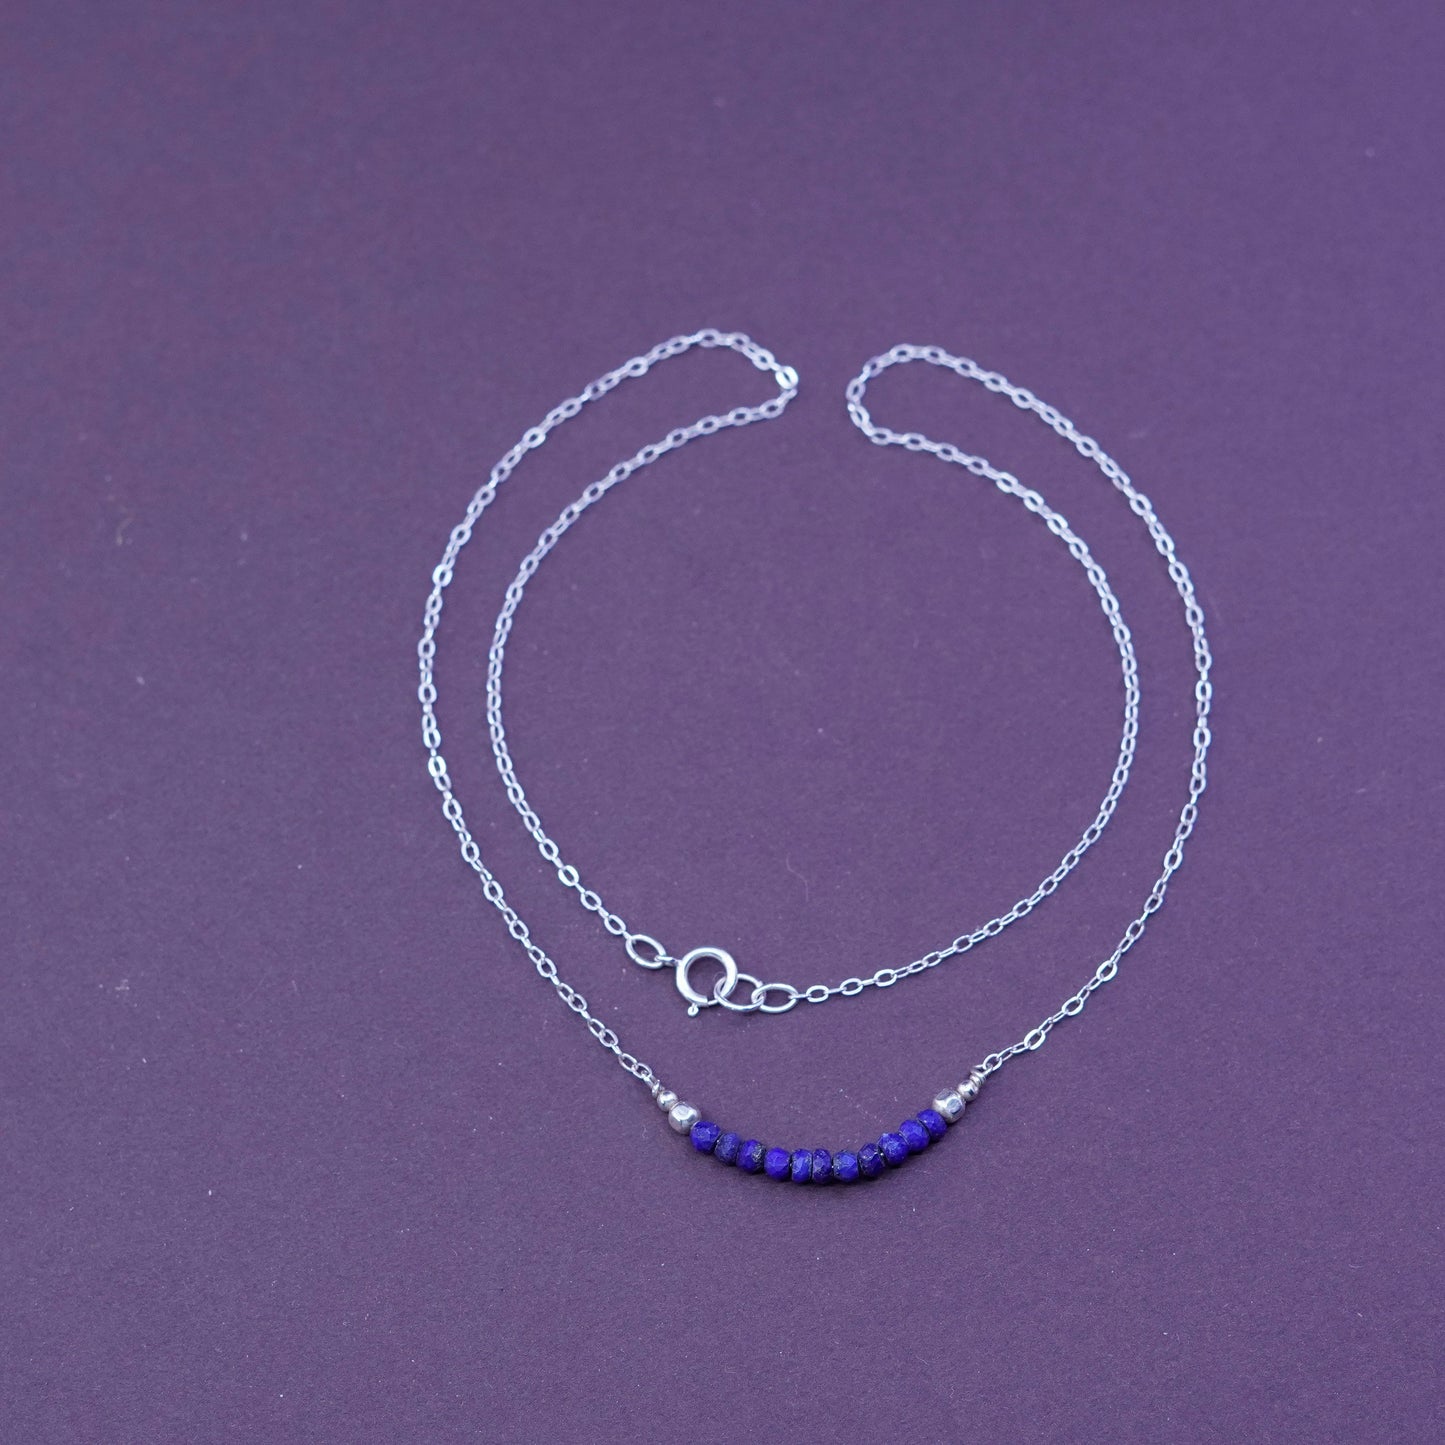 18”, sterling silver handmade necklace, 925 circle chain with lapis bar pendant